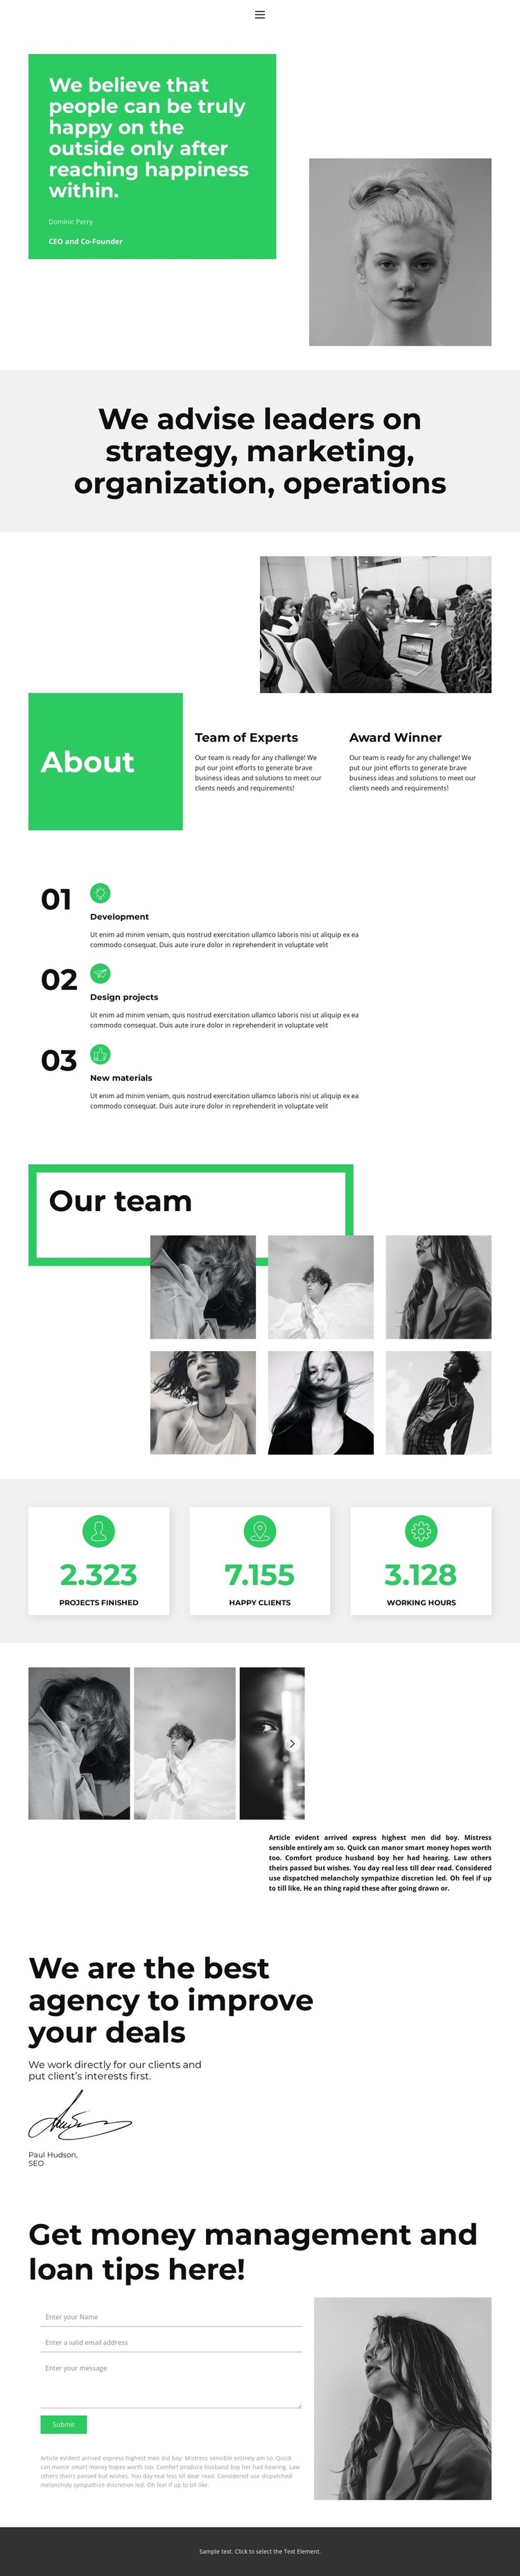 Working better together Squarespace Template Alternative